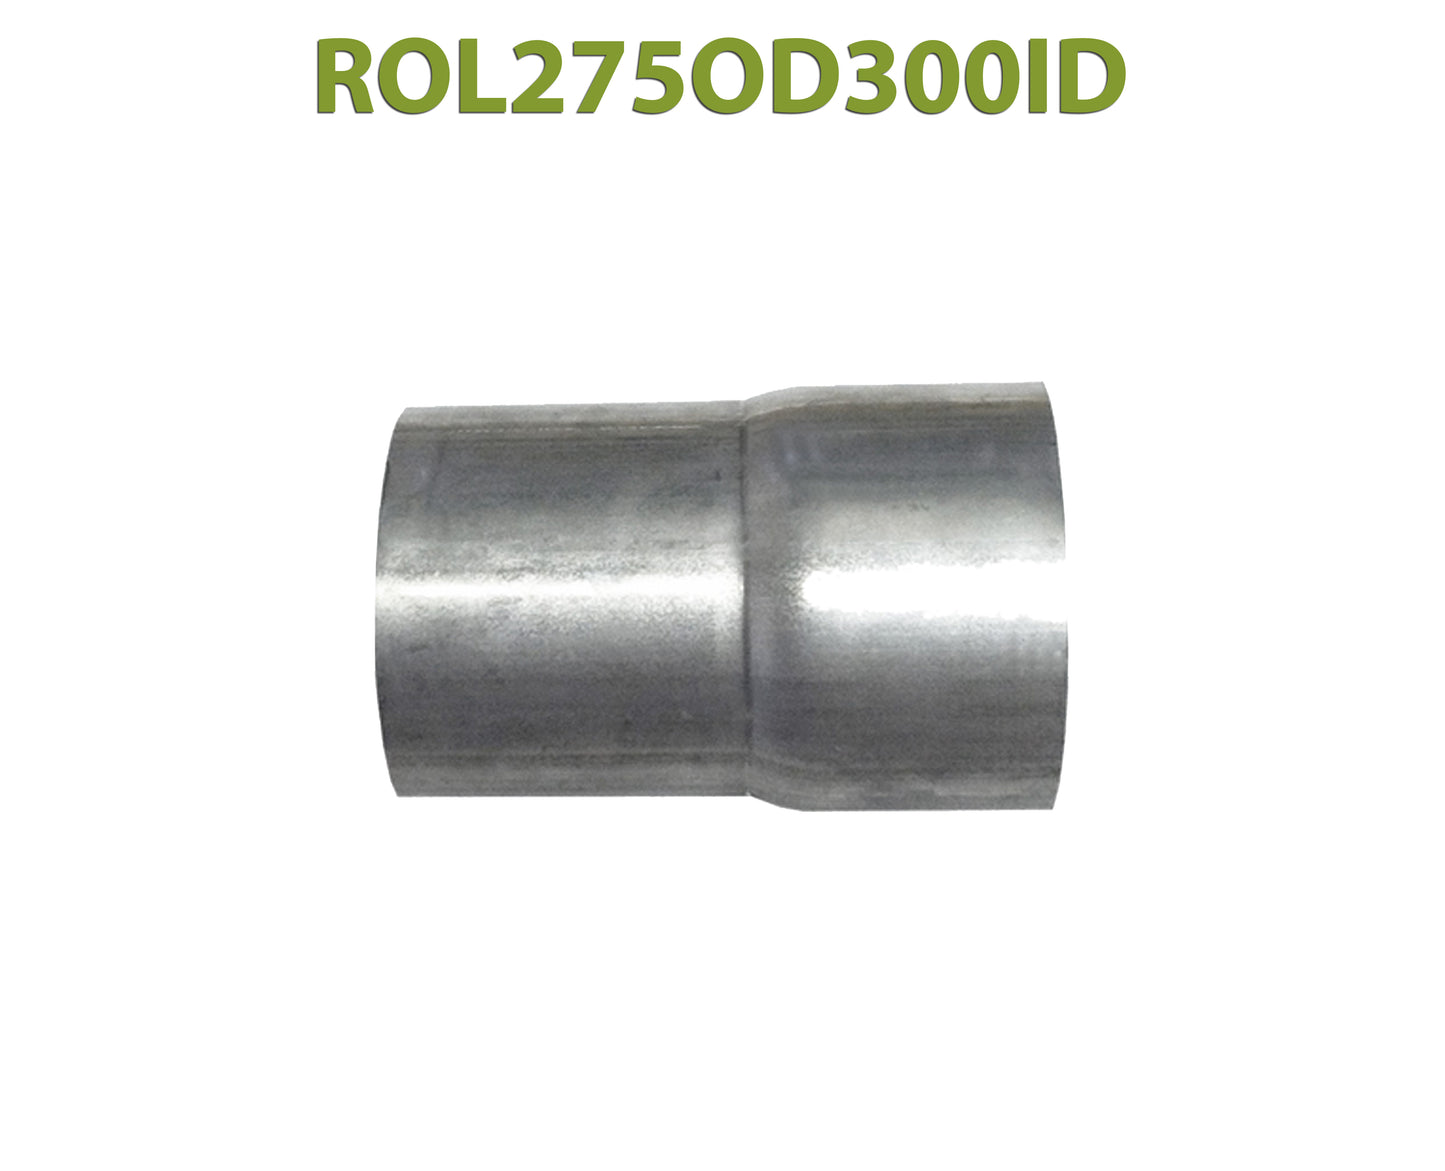 ROL275OD300ID 548584 2 3/4” OD to 3” ID Universal Exhaust Component to Pipe Adapter Reducer